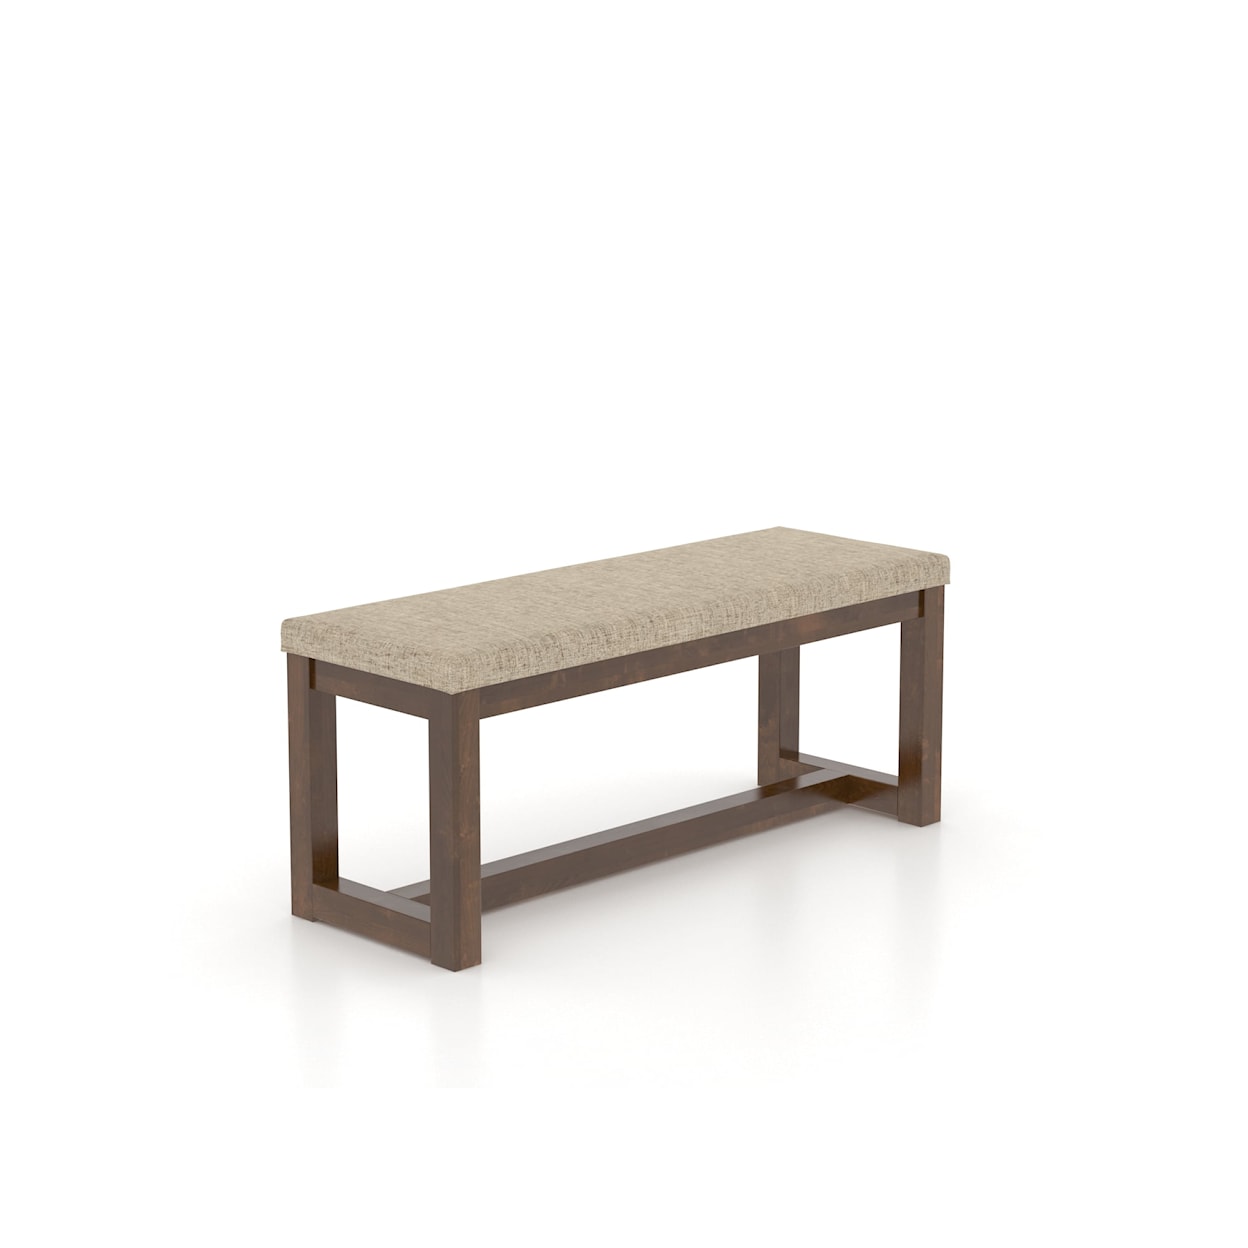 Canadel Canadel Upholstered bench